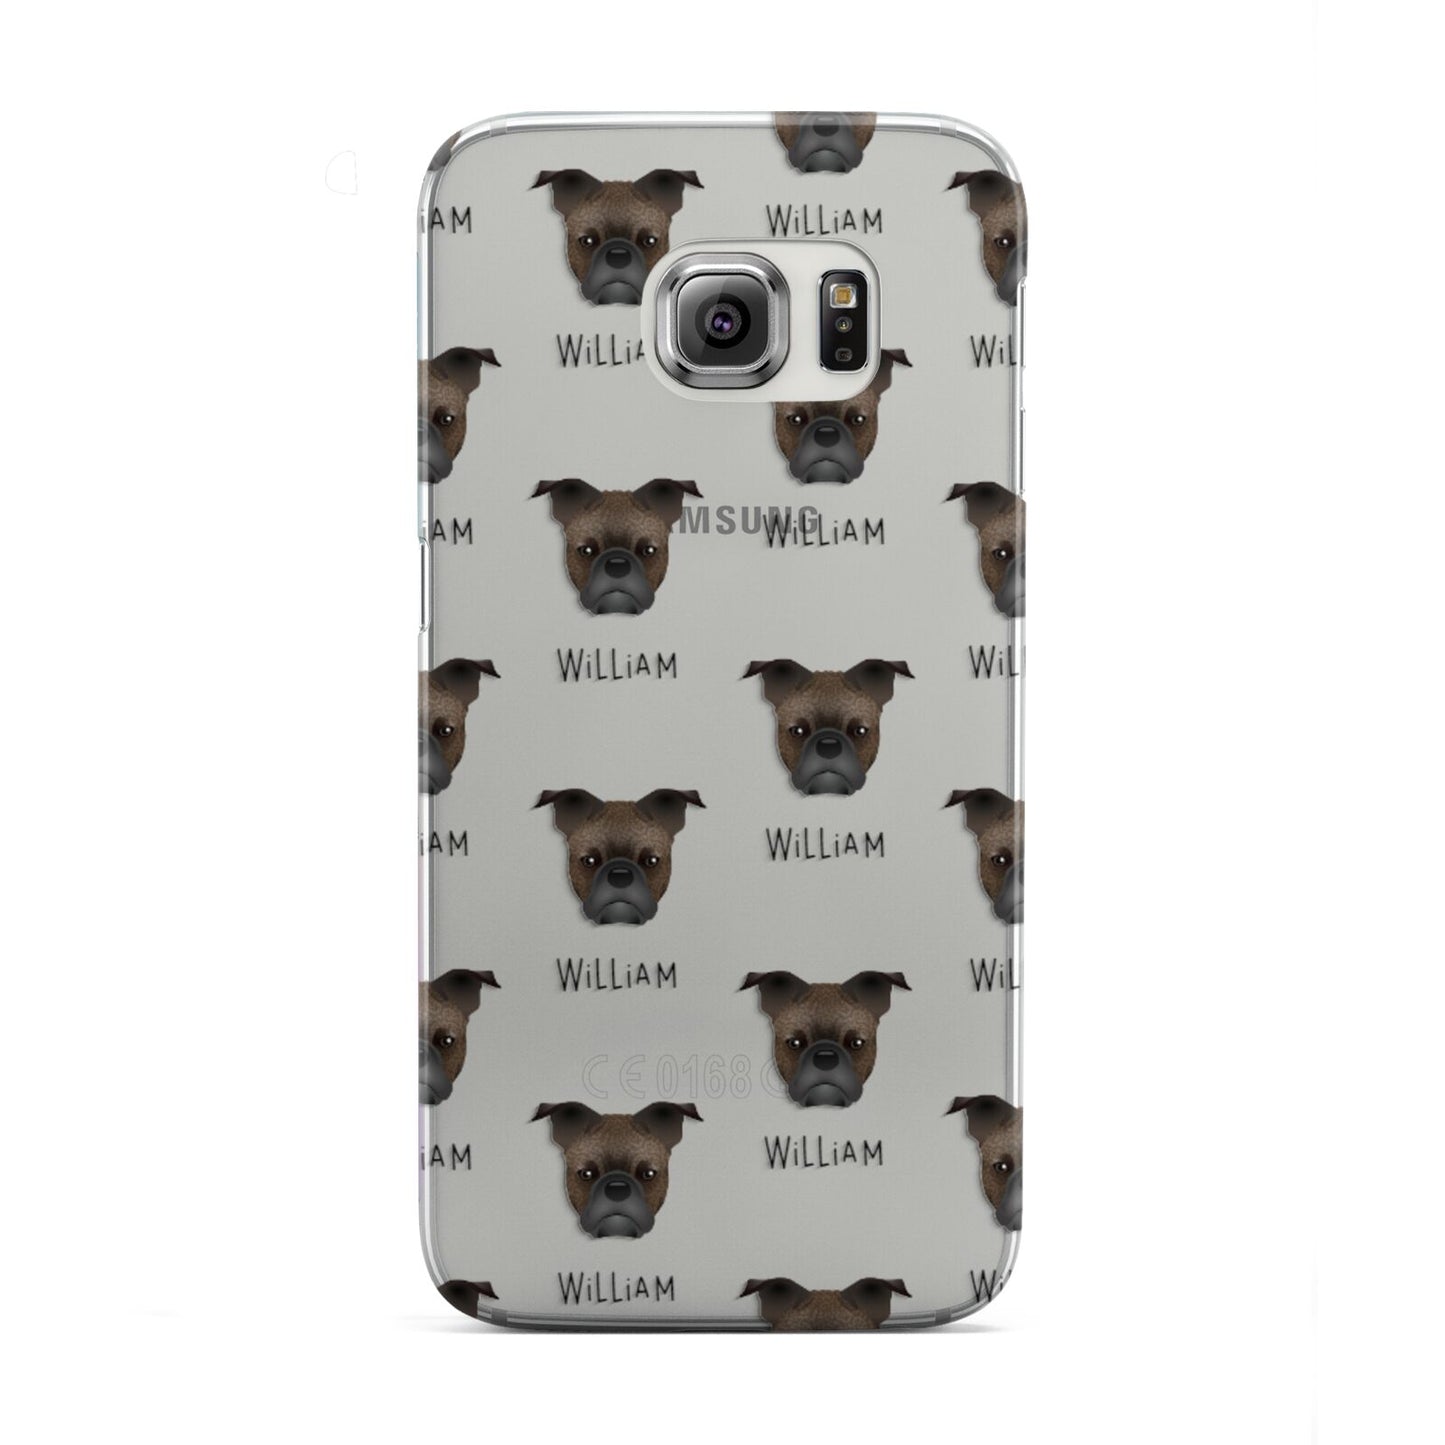 Frug Icon with Name Samsung Galaxy S6 Edge Case